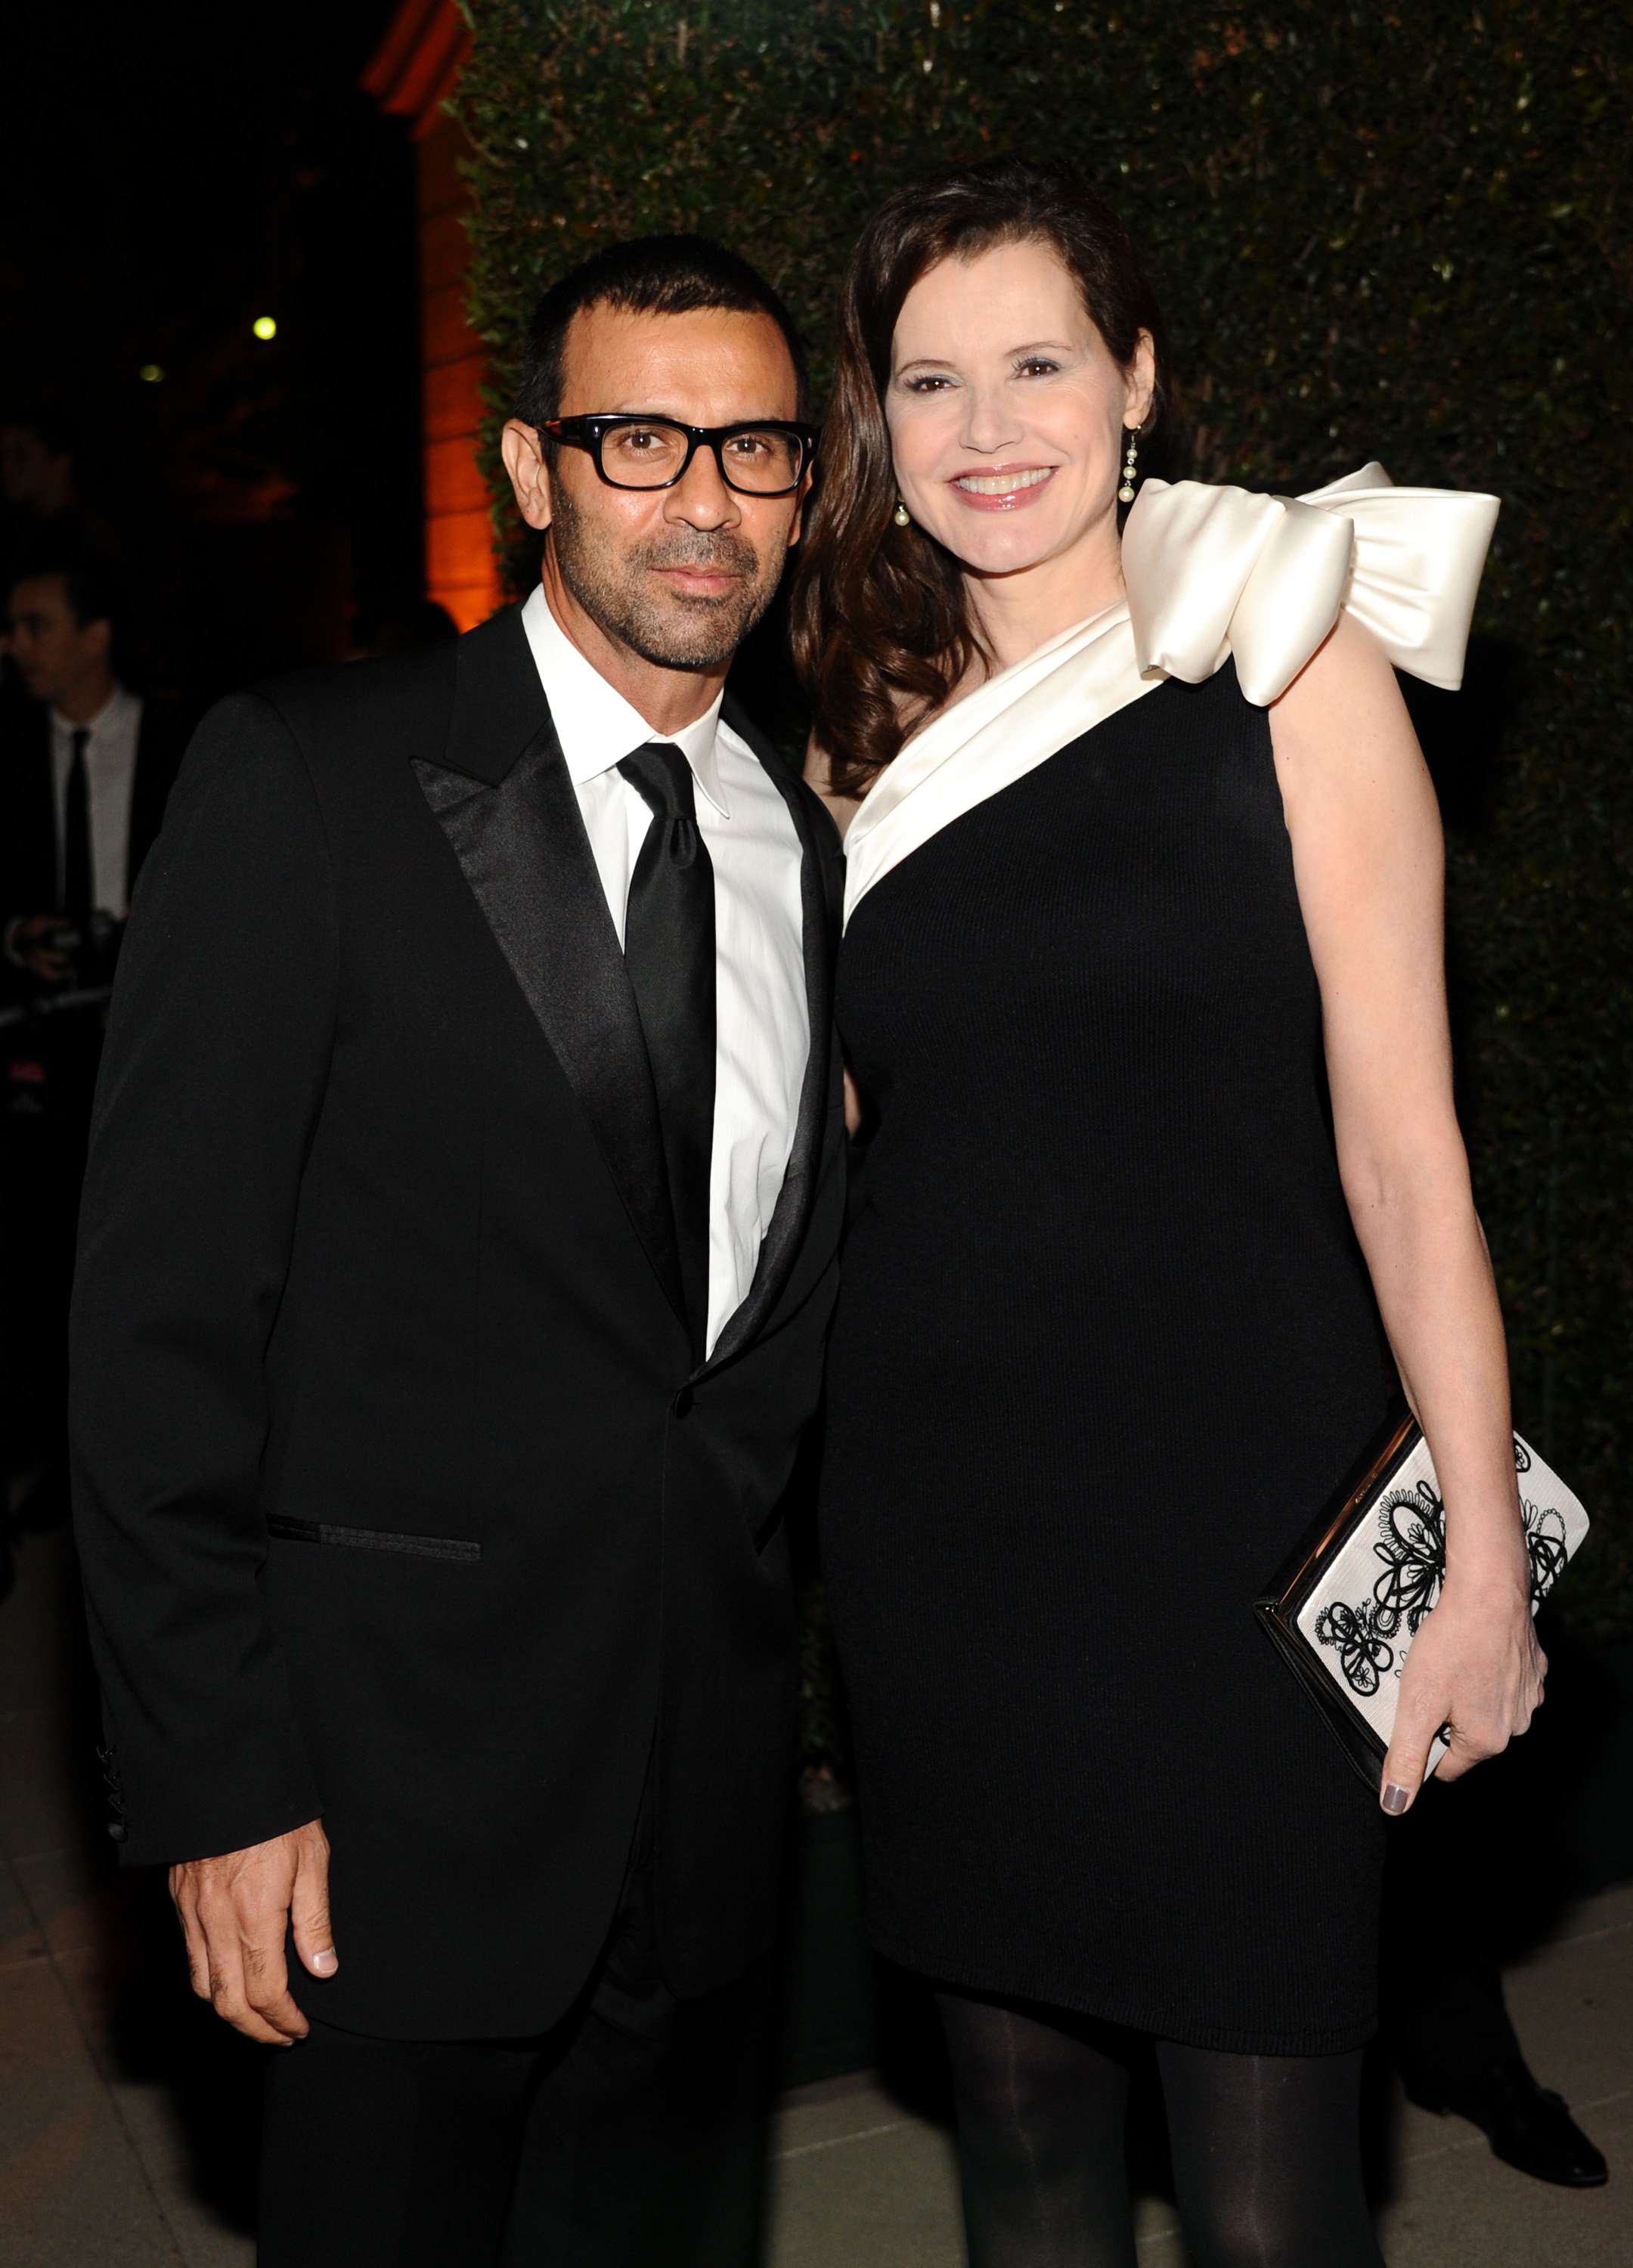 Geena Davis and Reza Jarrahy attend the Wallis Annenberg Center for the Performing Arts Inaugural Gala at Wallis Annenberg Center for the Performing Arts on October 17, 2013 in Beverly Hills, California.  / Source: Getty Images